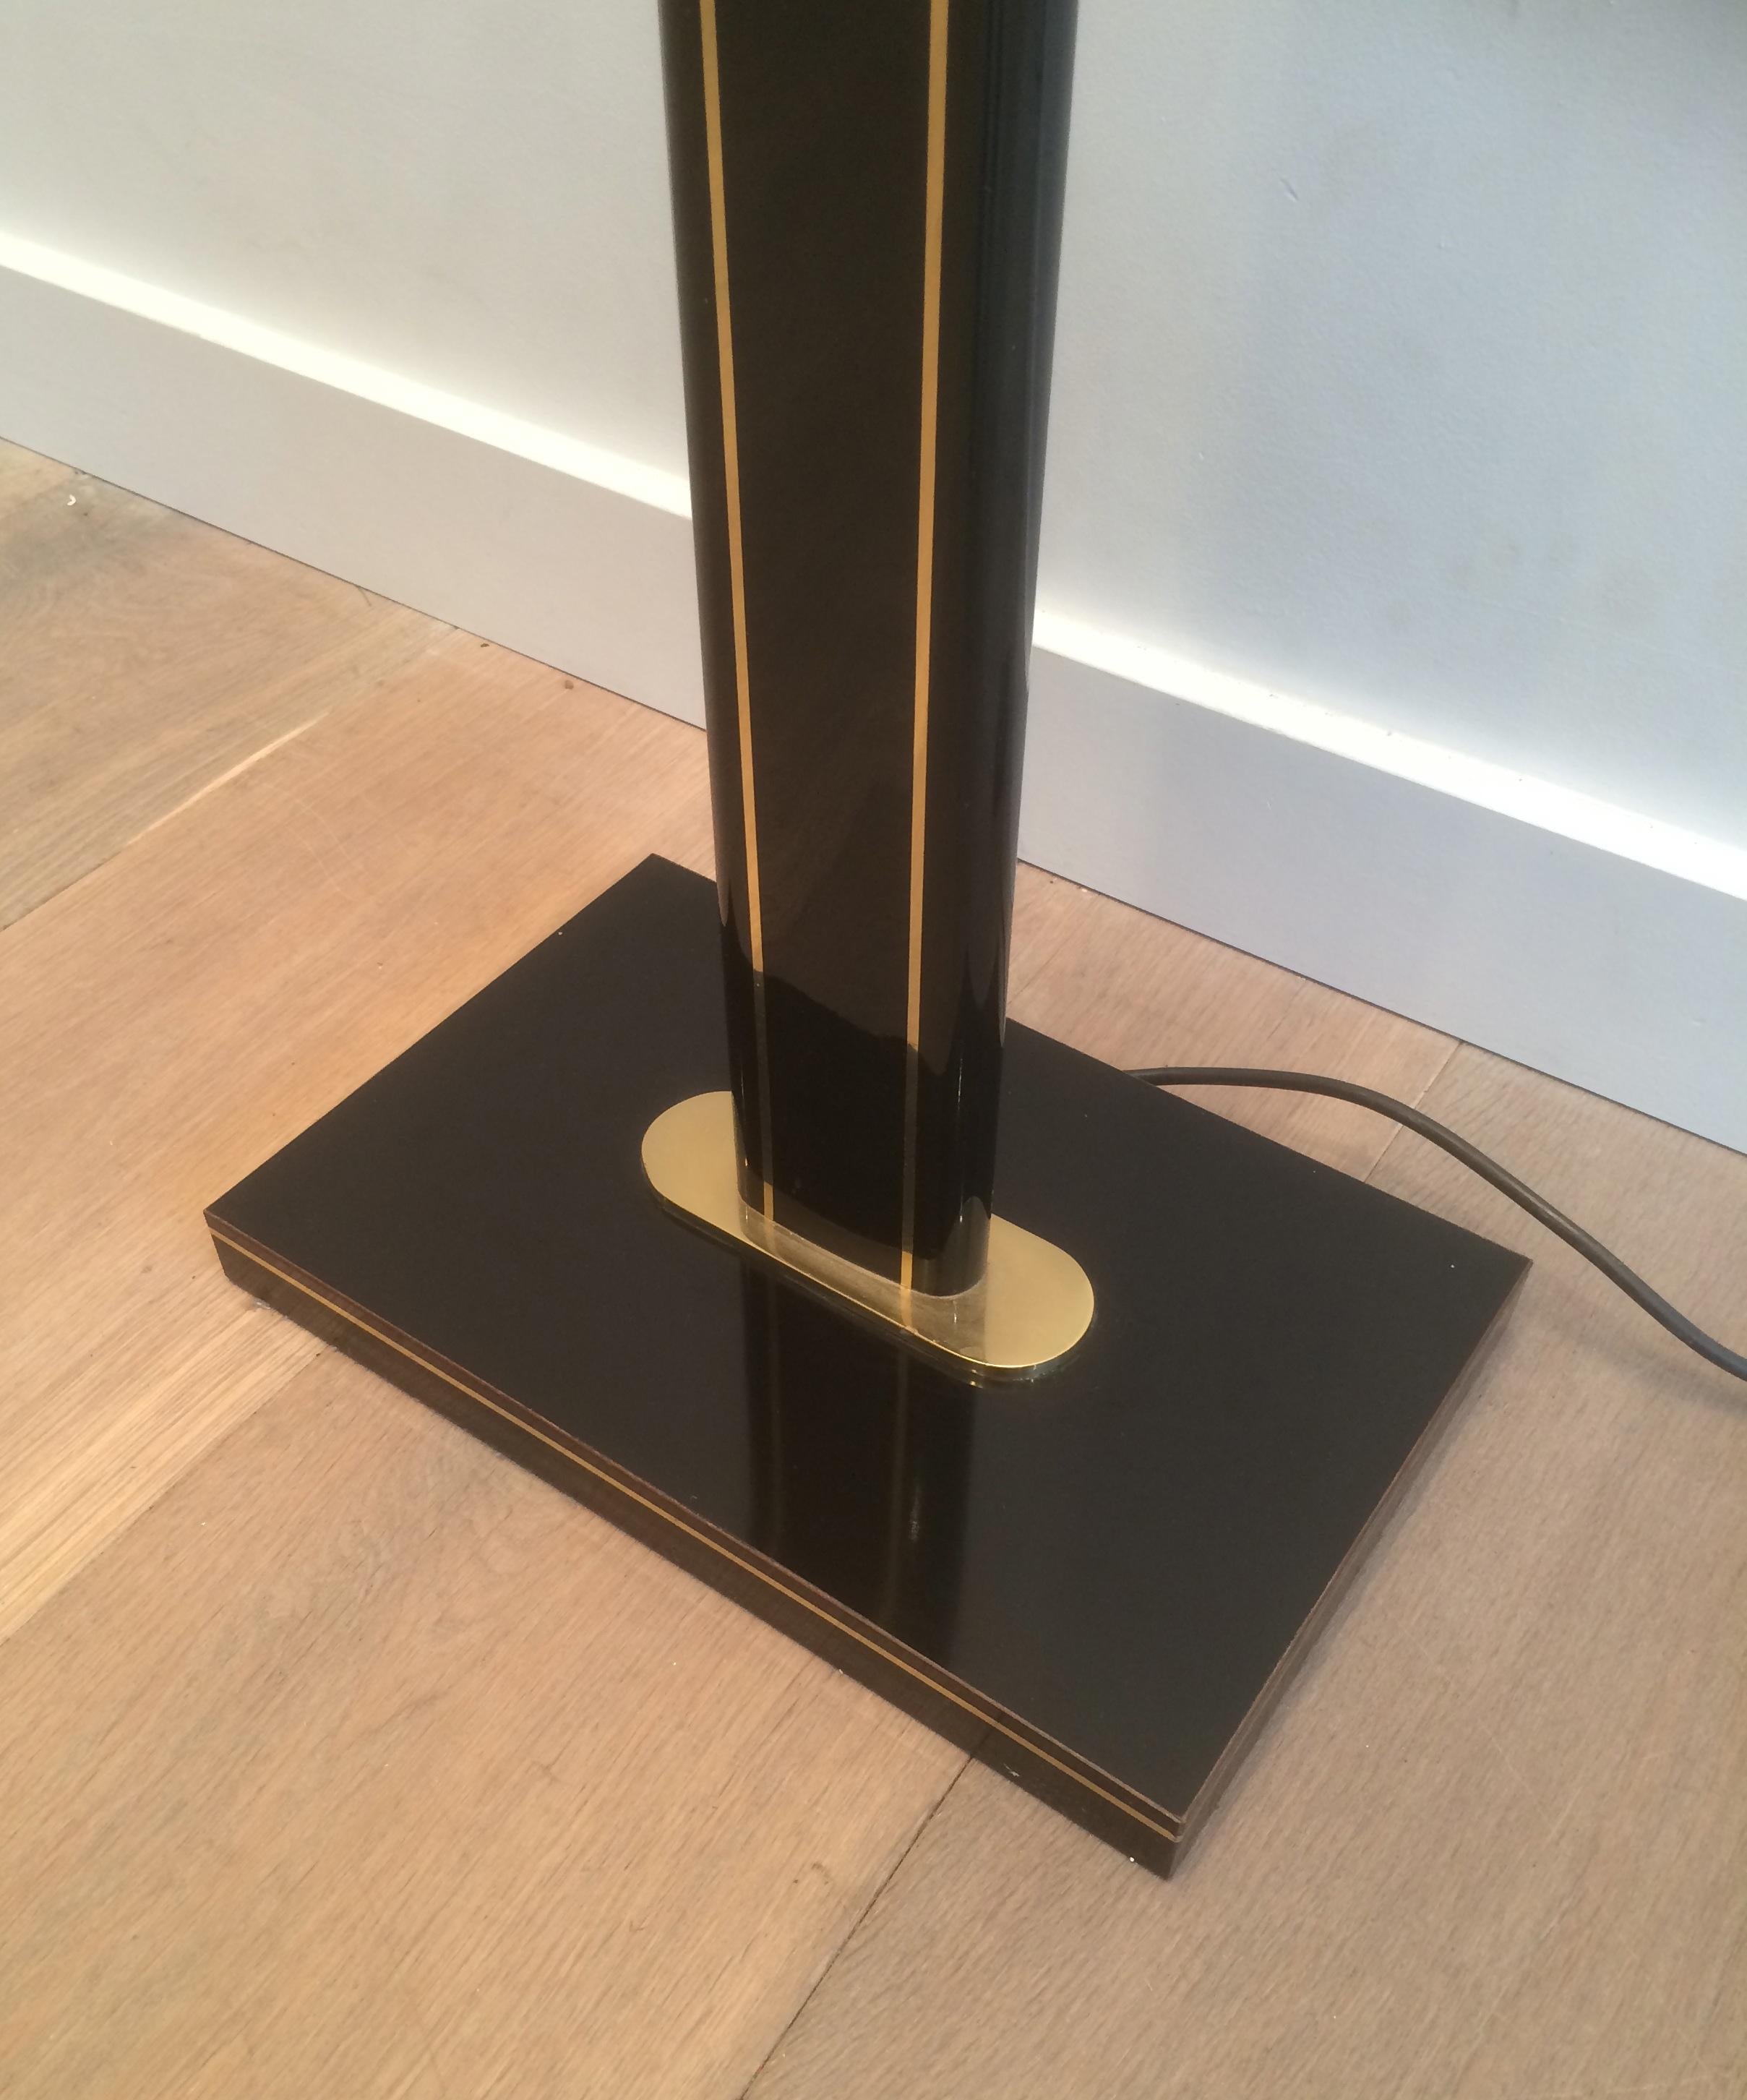 Metal Black Lacquered and Brass Floor Lamp, French Work, Circa 1970 For Sale